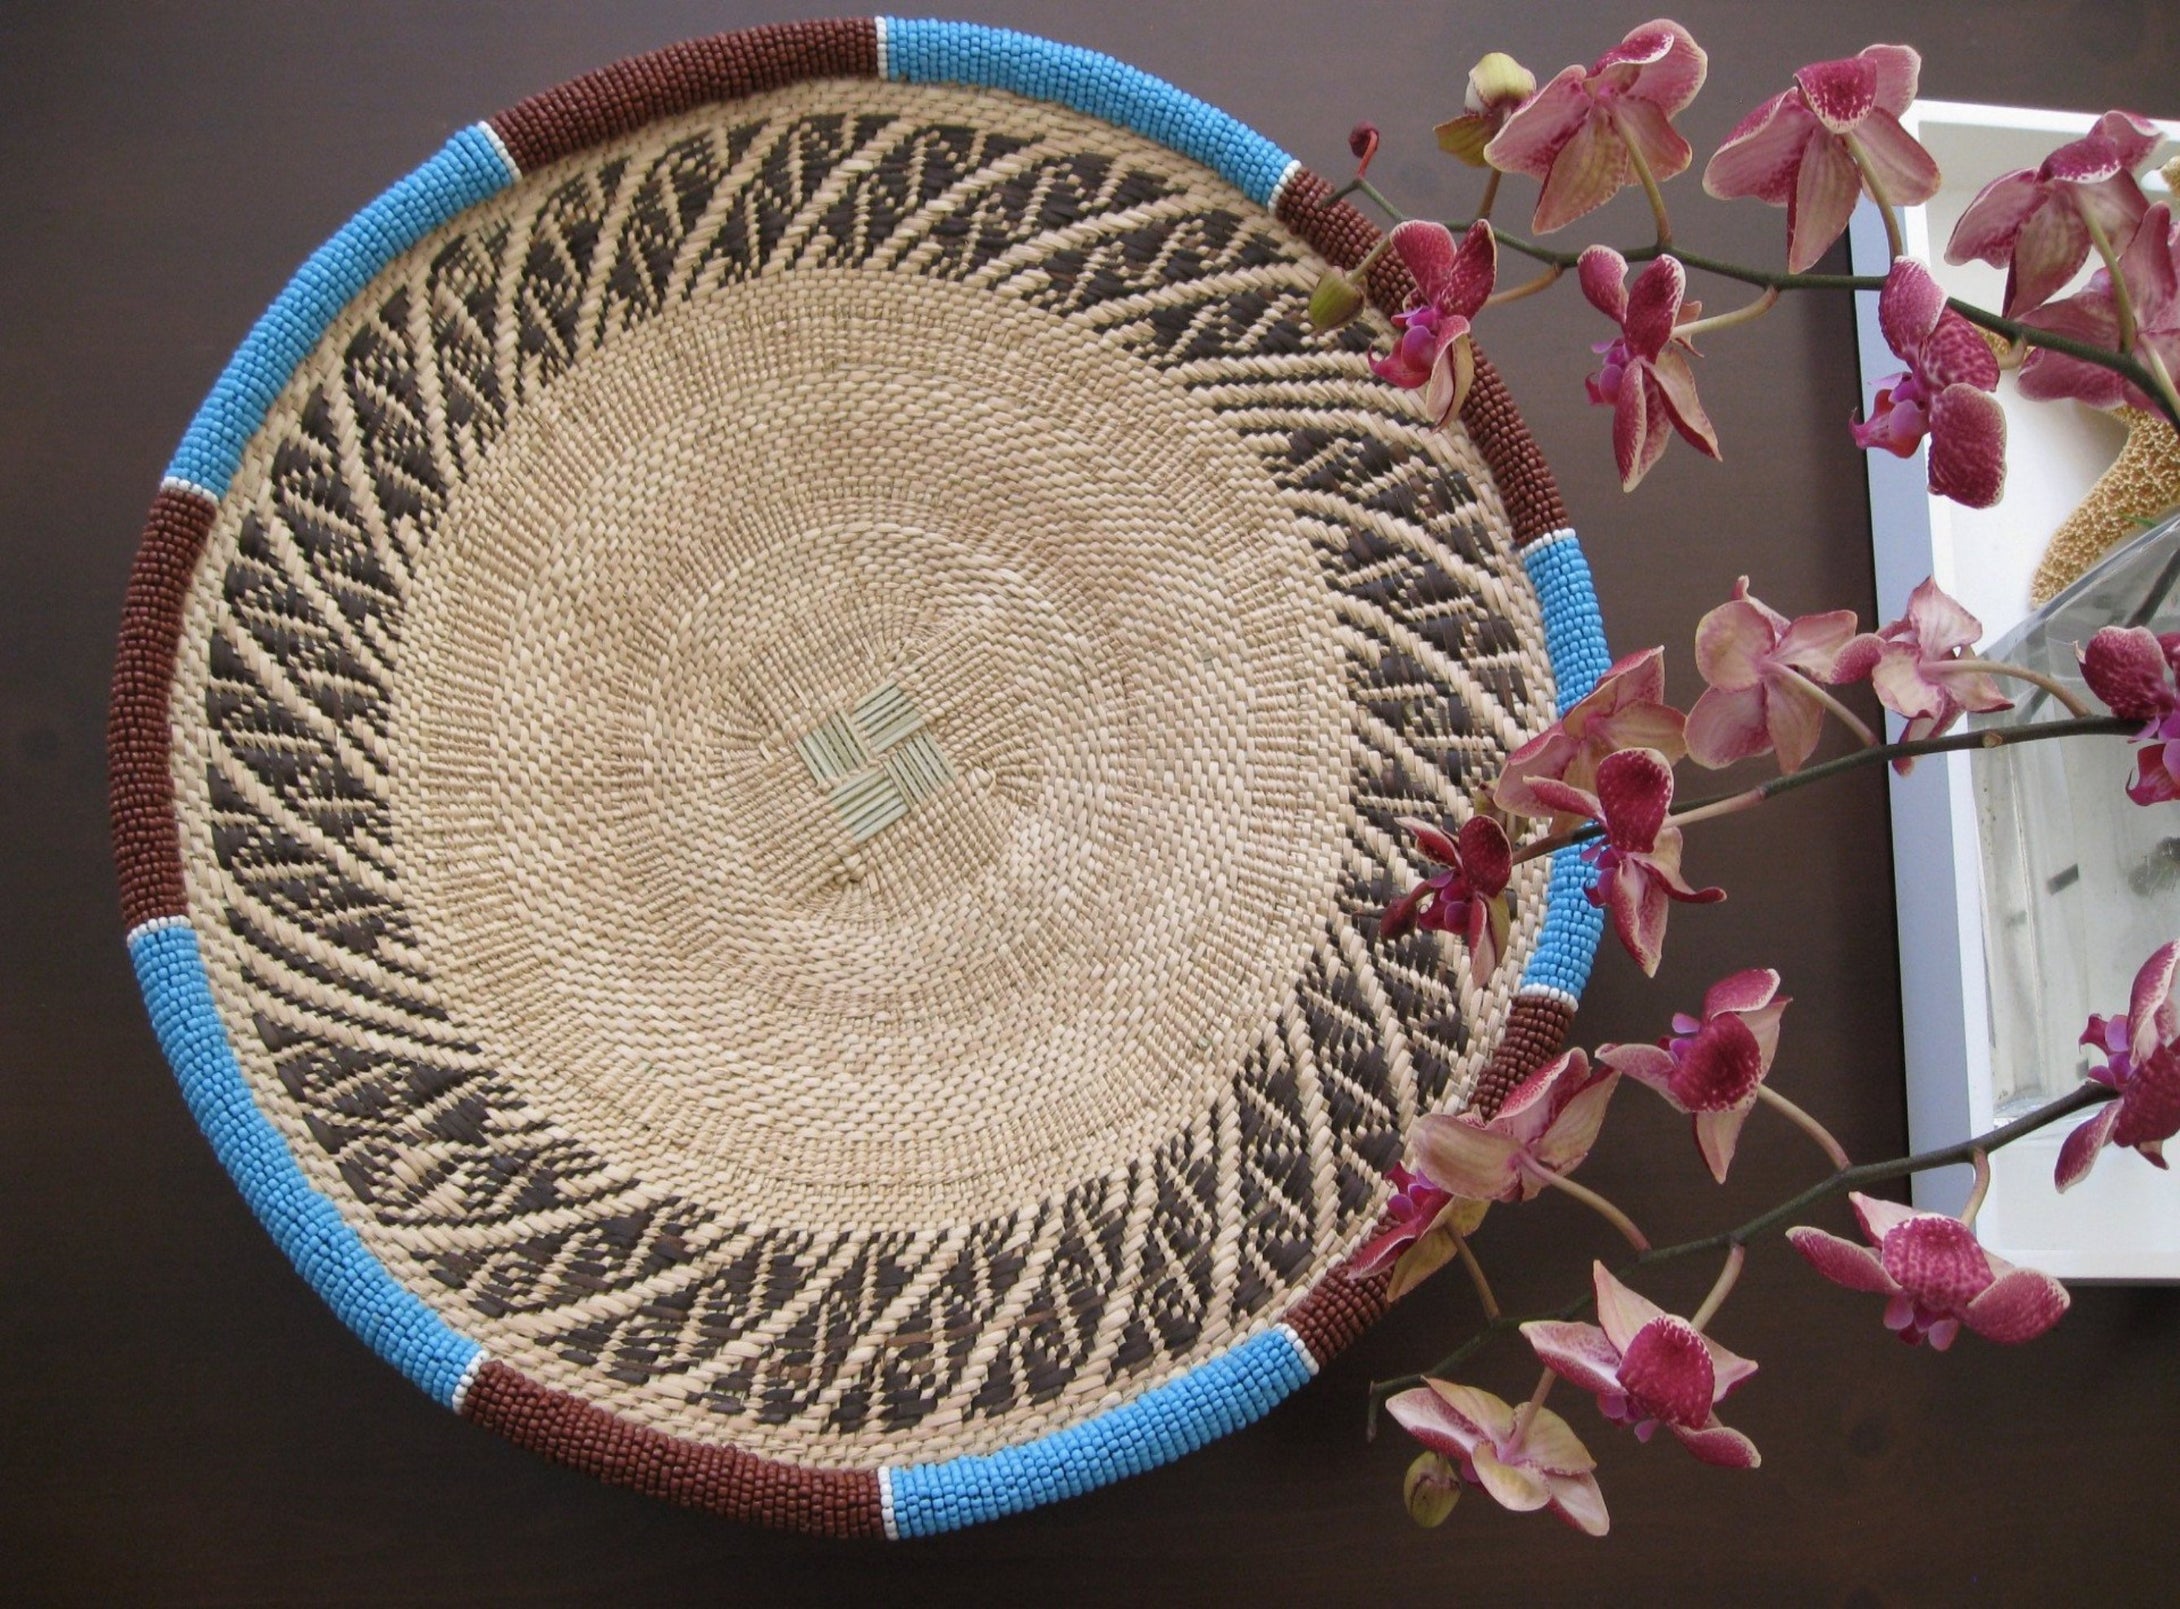 Medium handwoven basket with light blue and brown beads around the rim